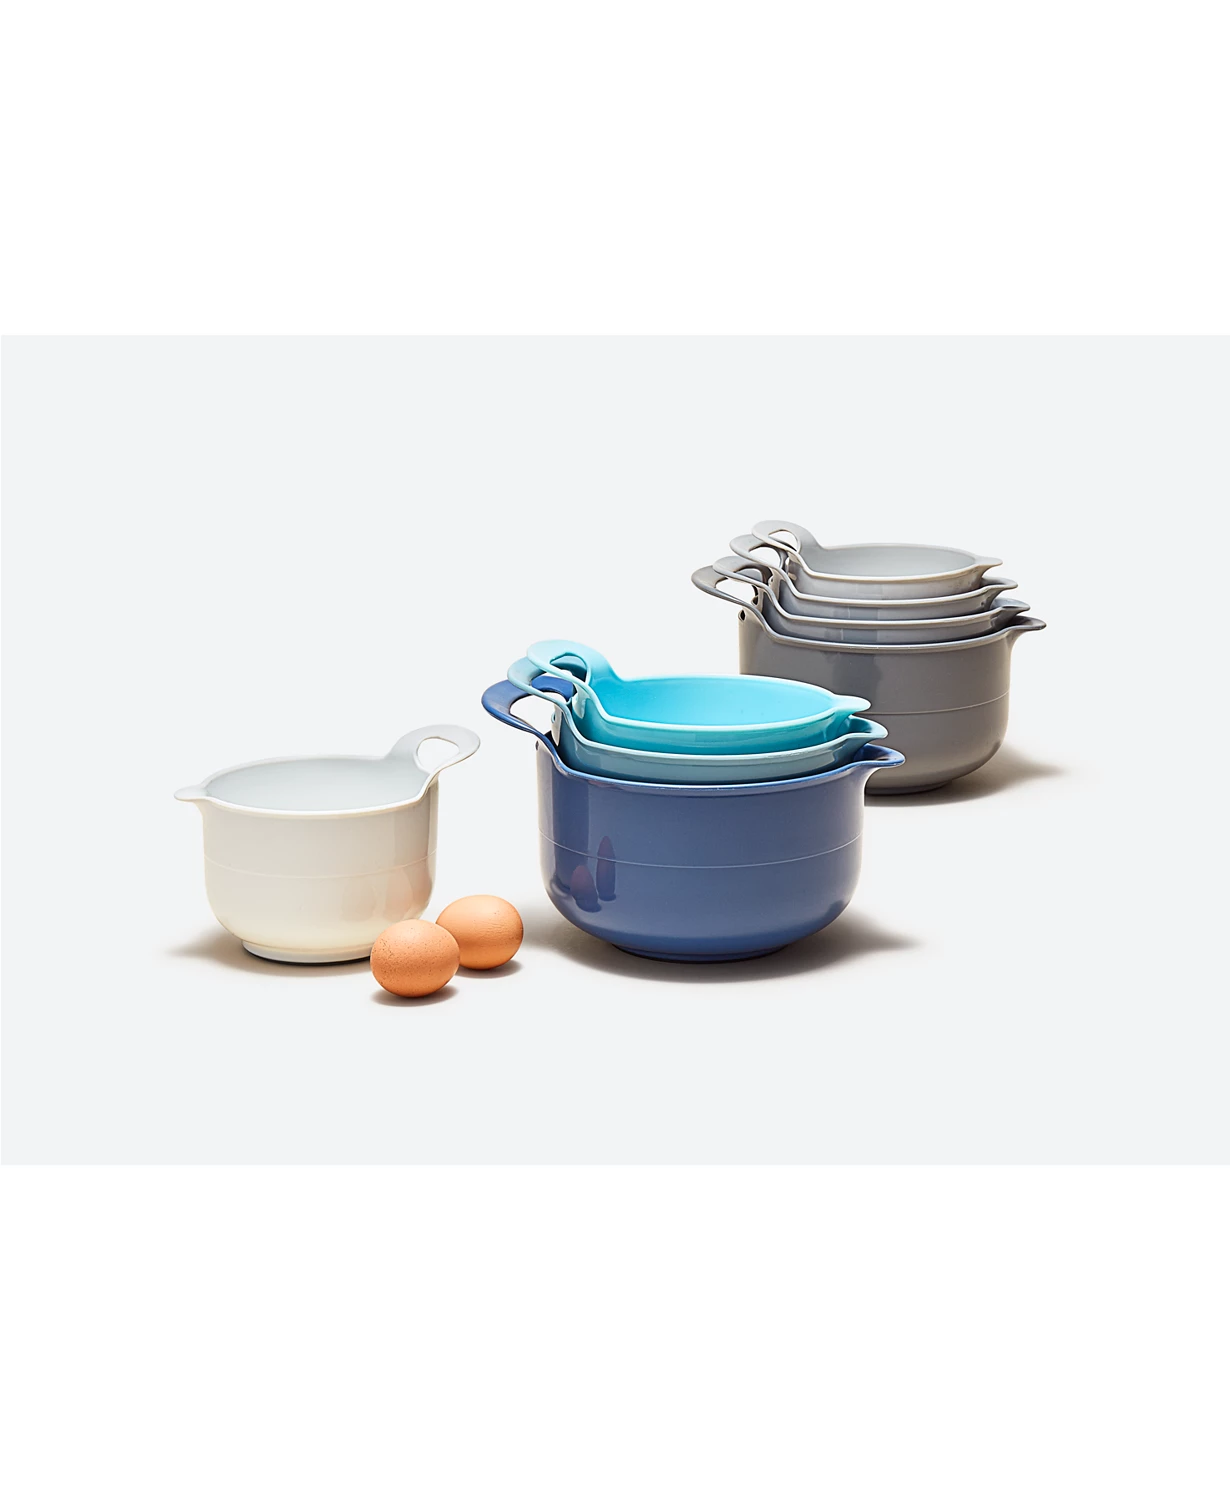 4-Piece Mixing Bowl Set ONLY $6.99 at Macy’s (Reg $30)